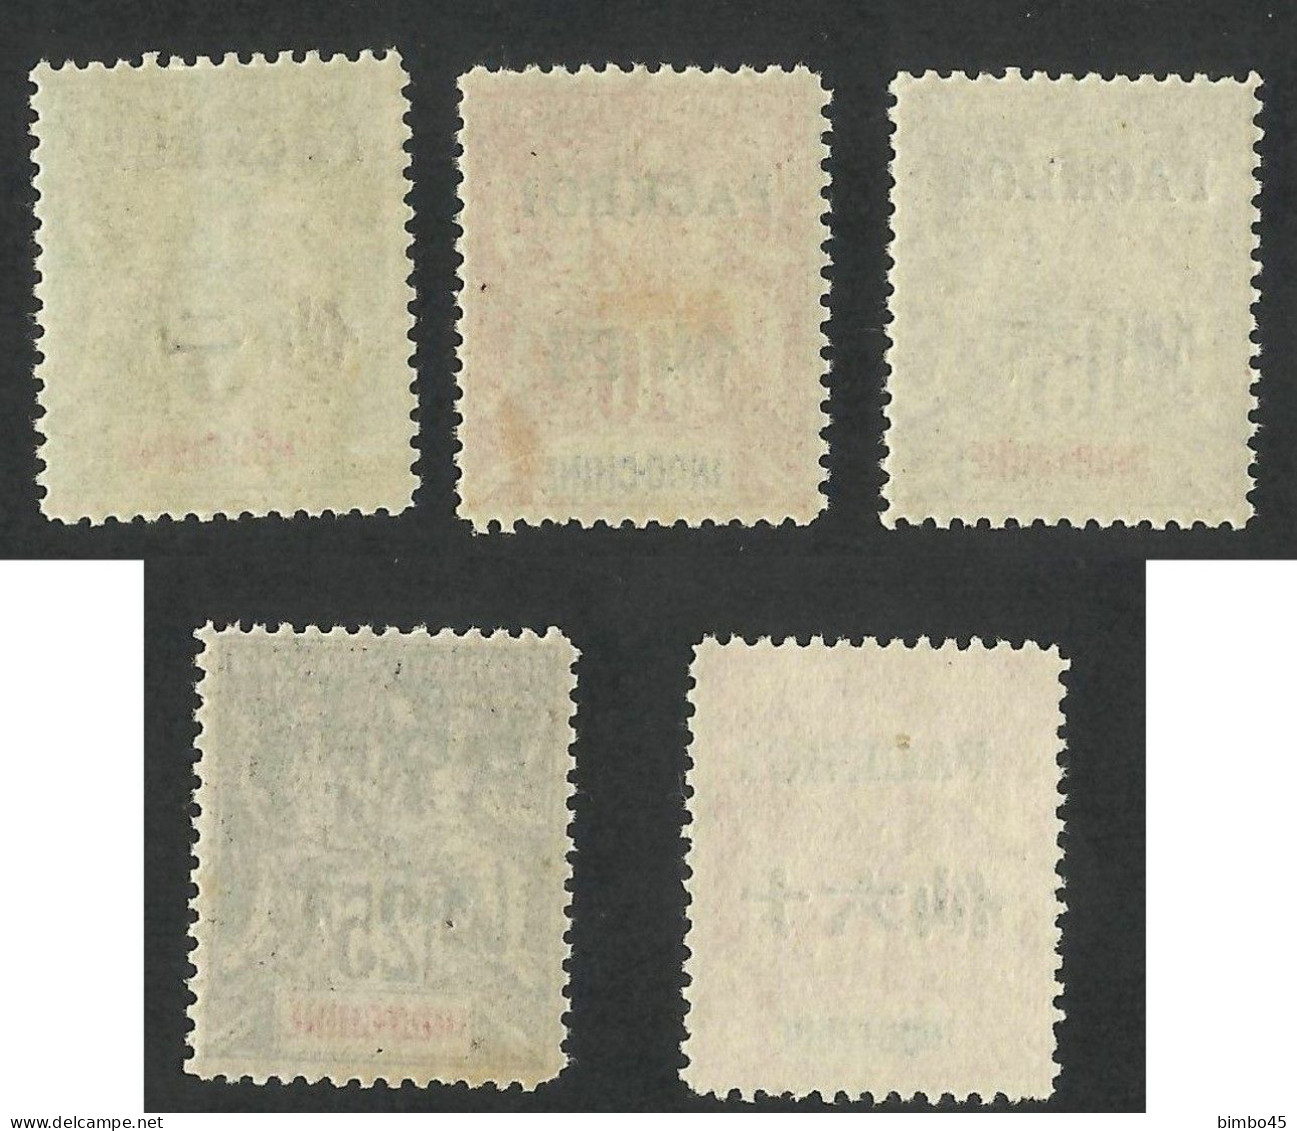 INDO-CHINE / FRENCH POST OFFICE IN PACKHOI /OVERPRINT ,,PACKHOI''-1902-1904 MNH & MLH - Forgery , Faux Fournier - Nuovi